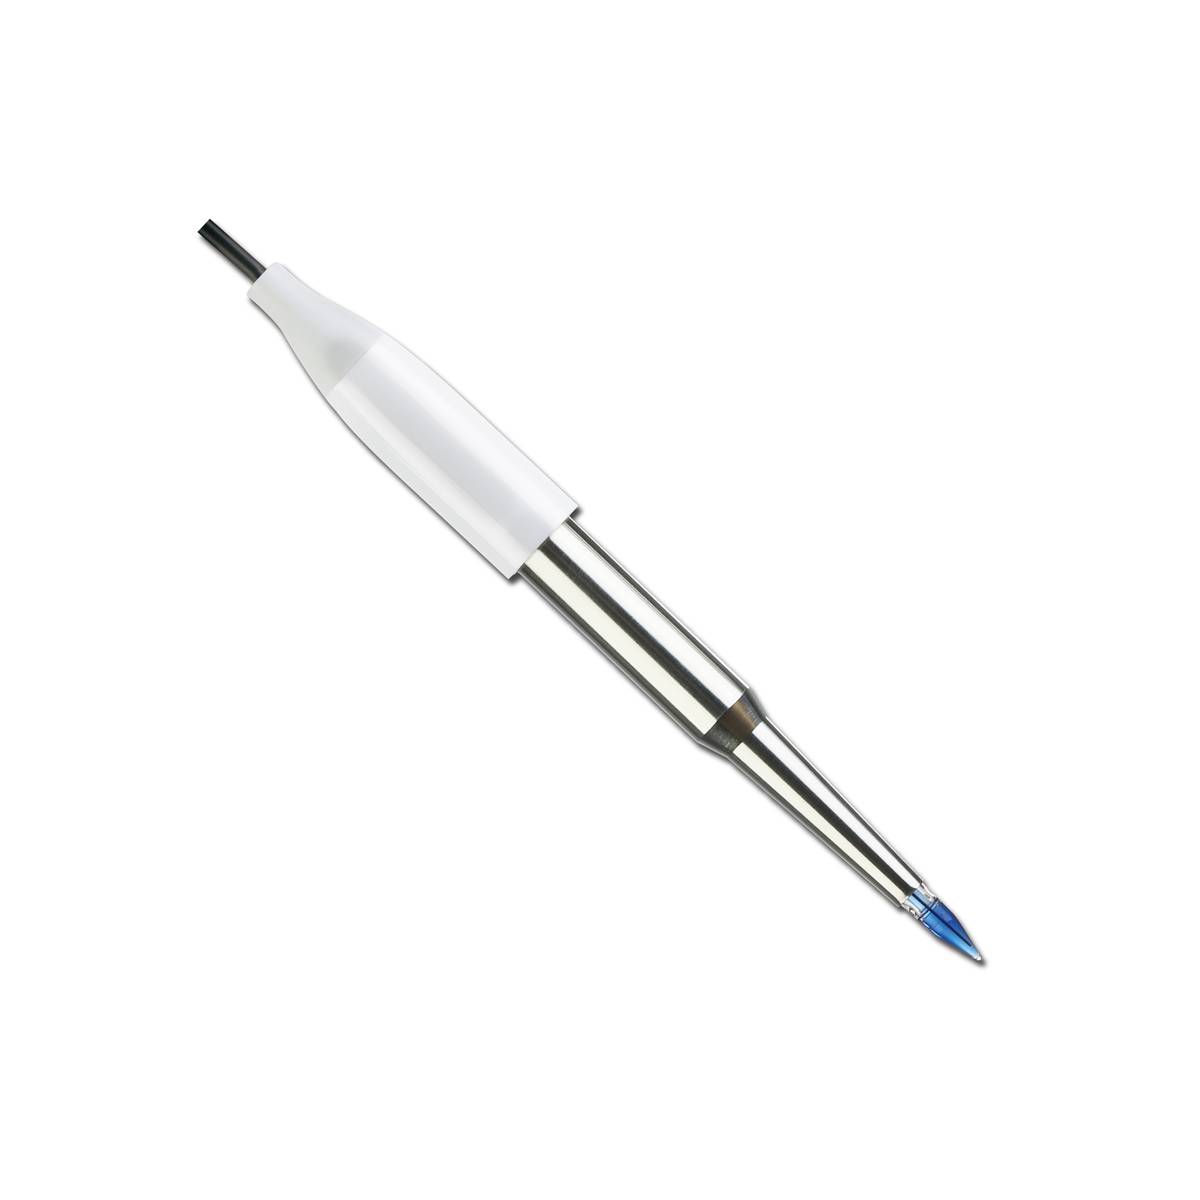 Picture of Apera Instruments LabSen 751 12 x 115 mm Stainless Steel Spear pH Electrode with 3 mm Cable for Solid Food Samples